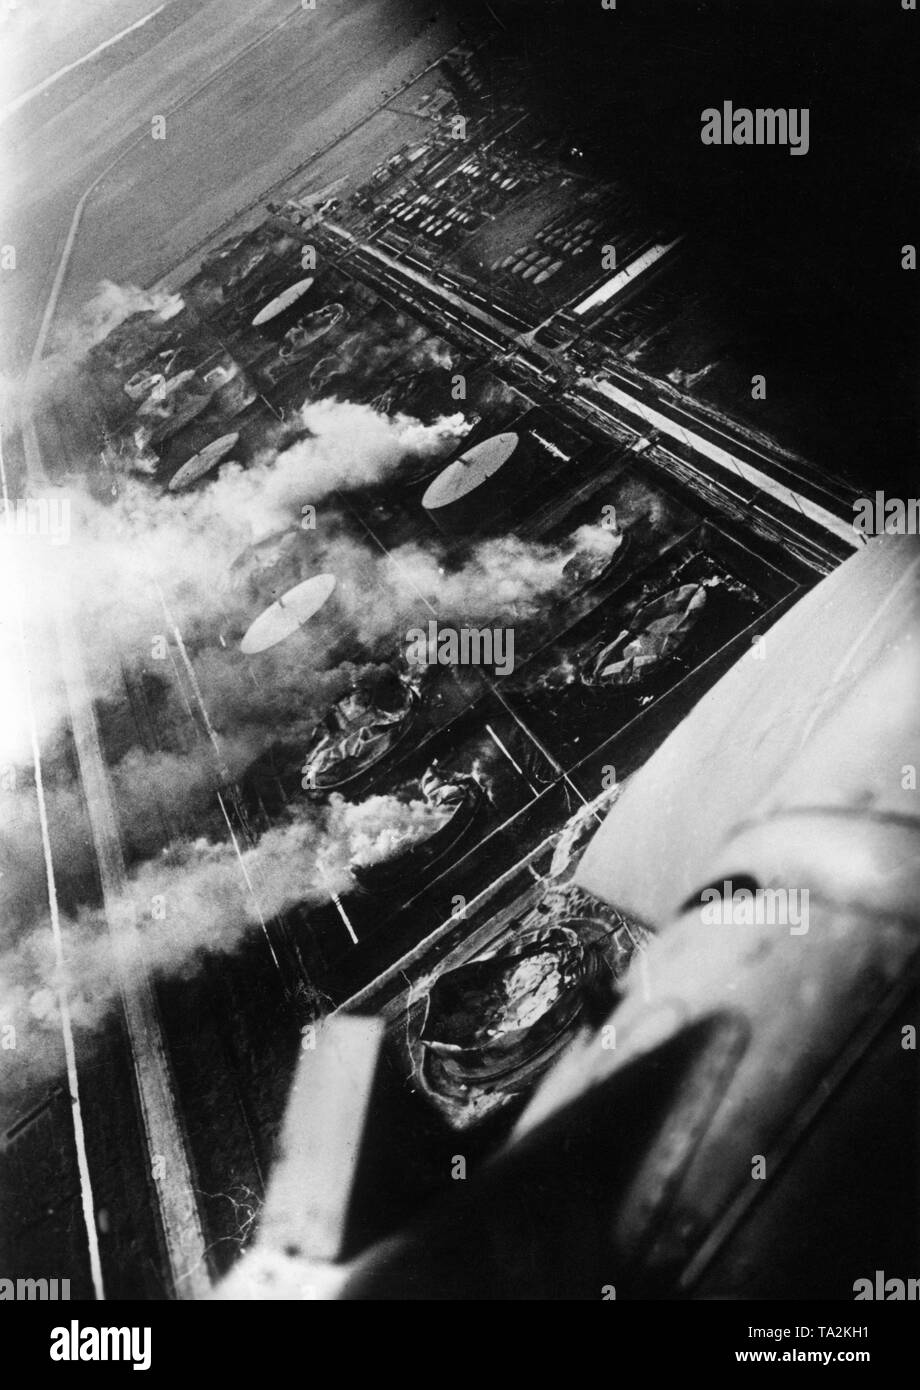 A Kampfgeschwader of Stukas (probably Junkers Ju 88 dive bombers) in an attack on the French city of Le Havre. Here, burning oil tanks of the harbor facility. Photo: war correspondent Stift. Stock Photo